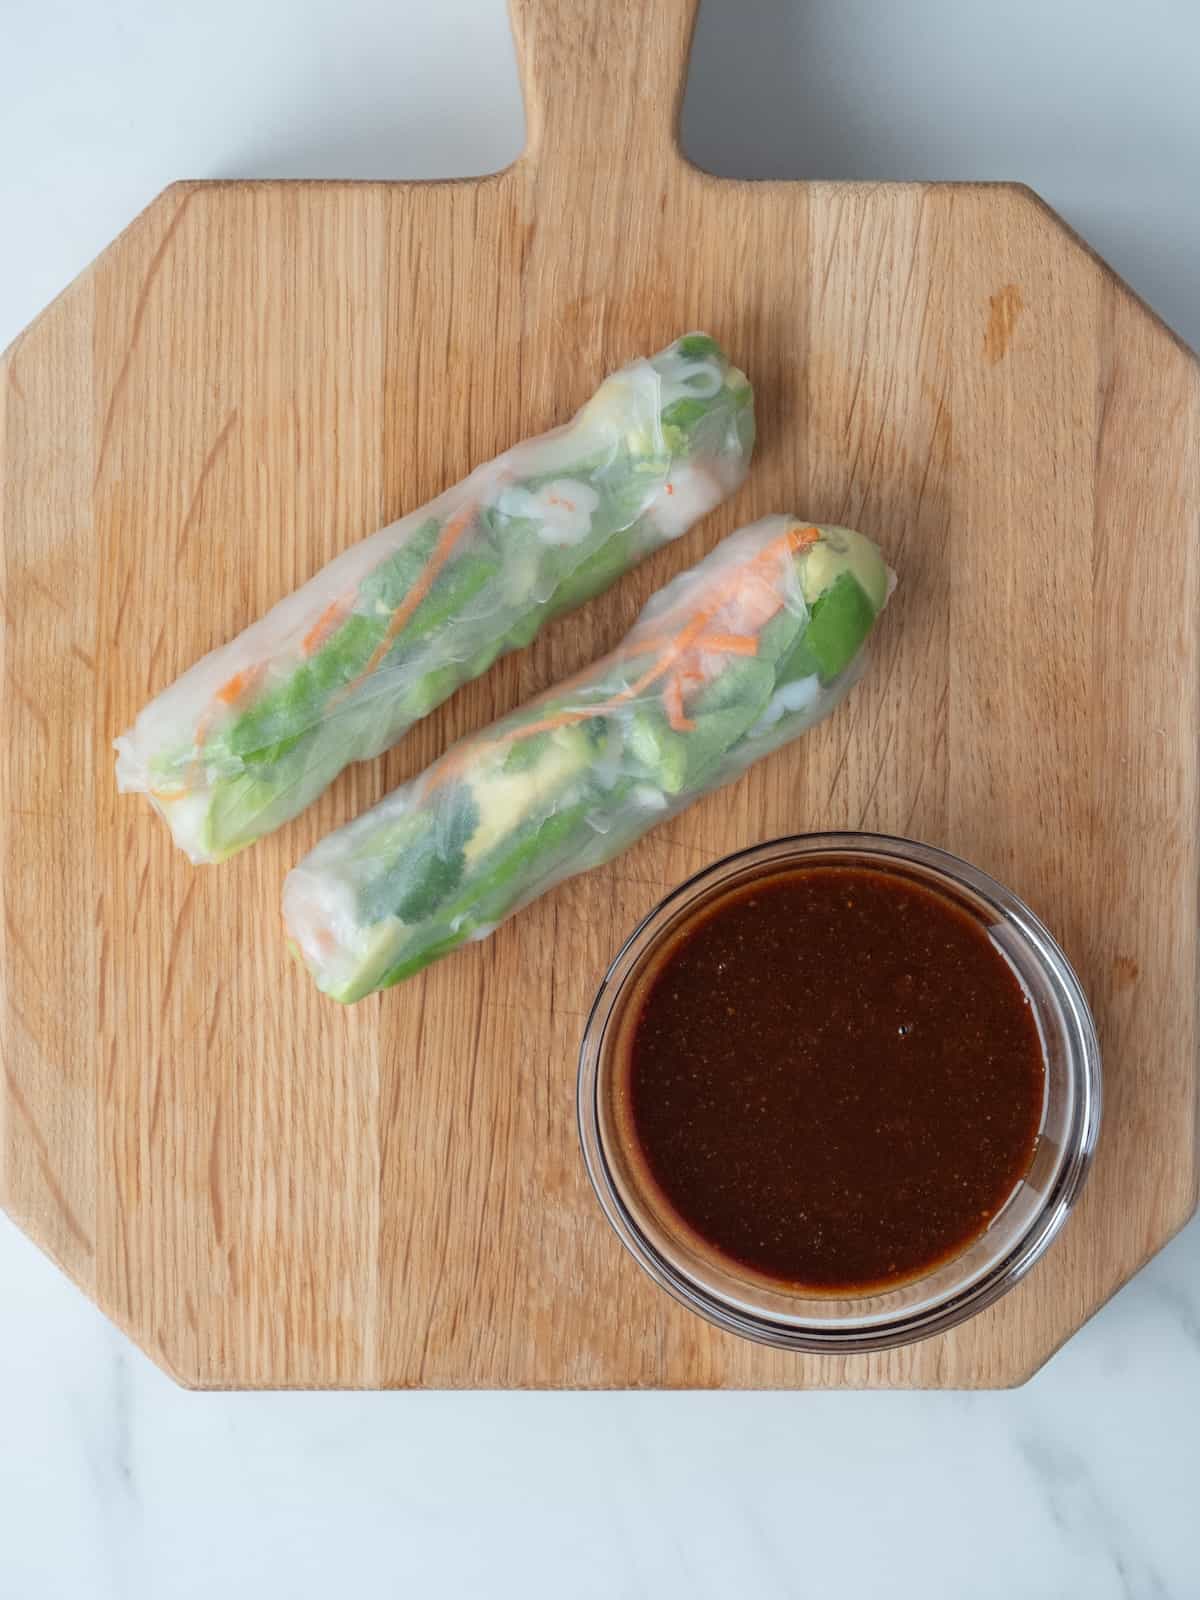 A wooden cutting board with two rolled up spring rolls and a small glass bowl with the hoisin-peanut butter dipping sauce.